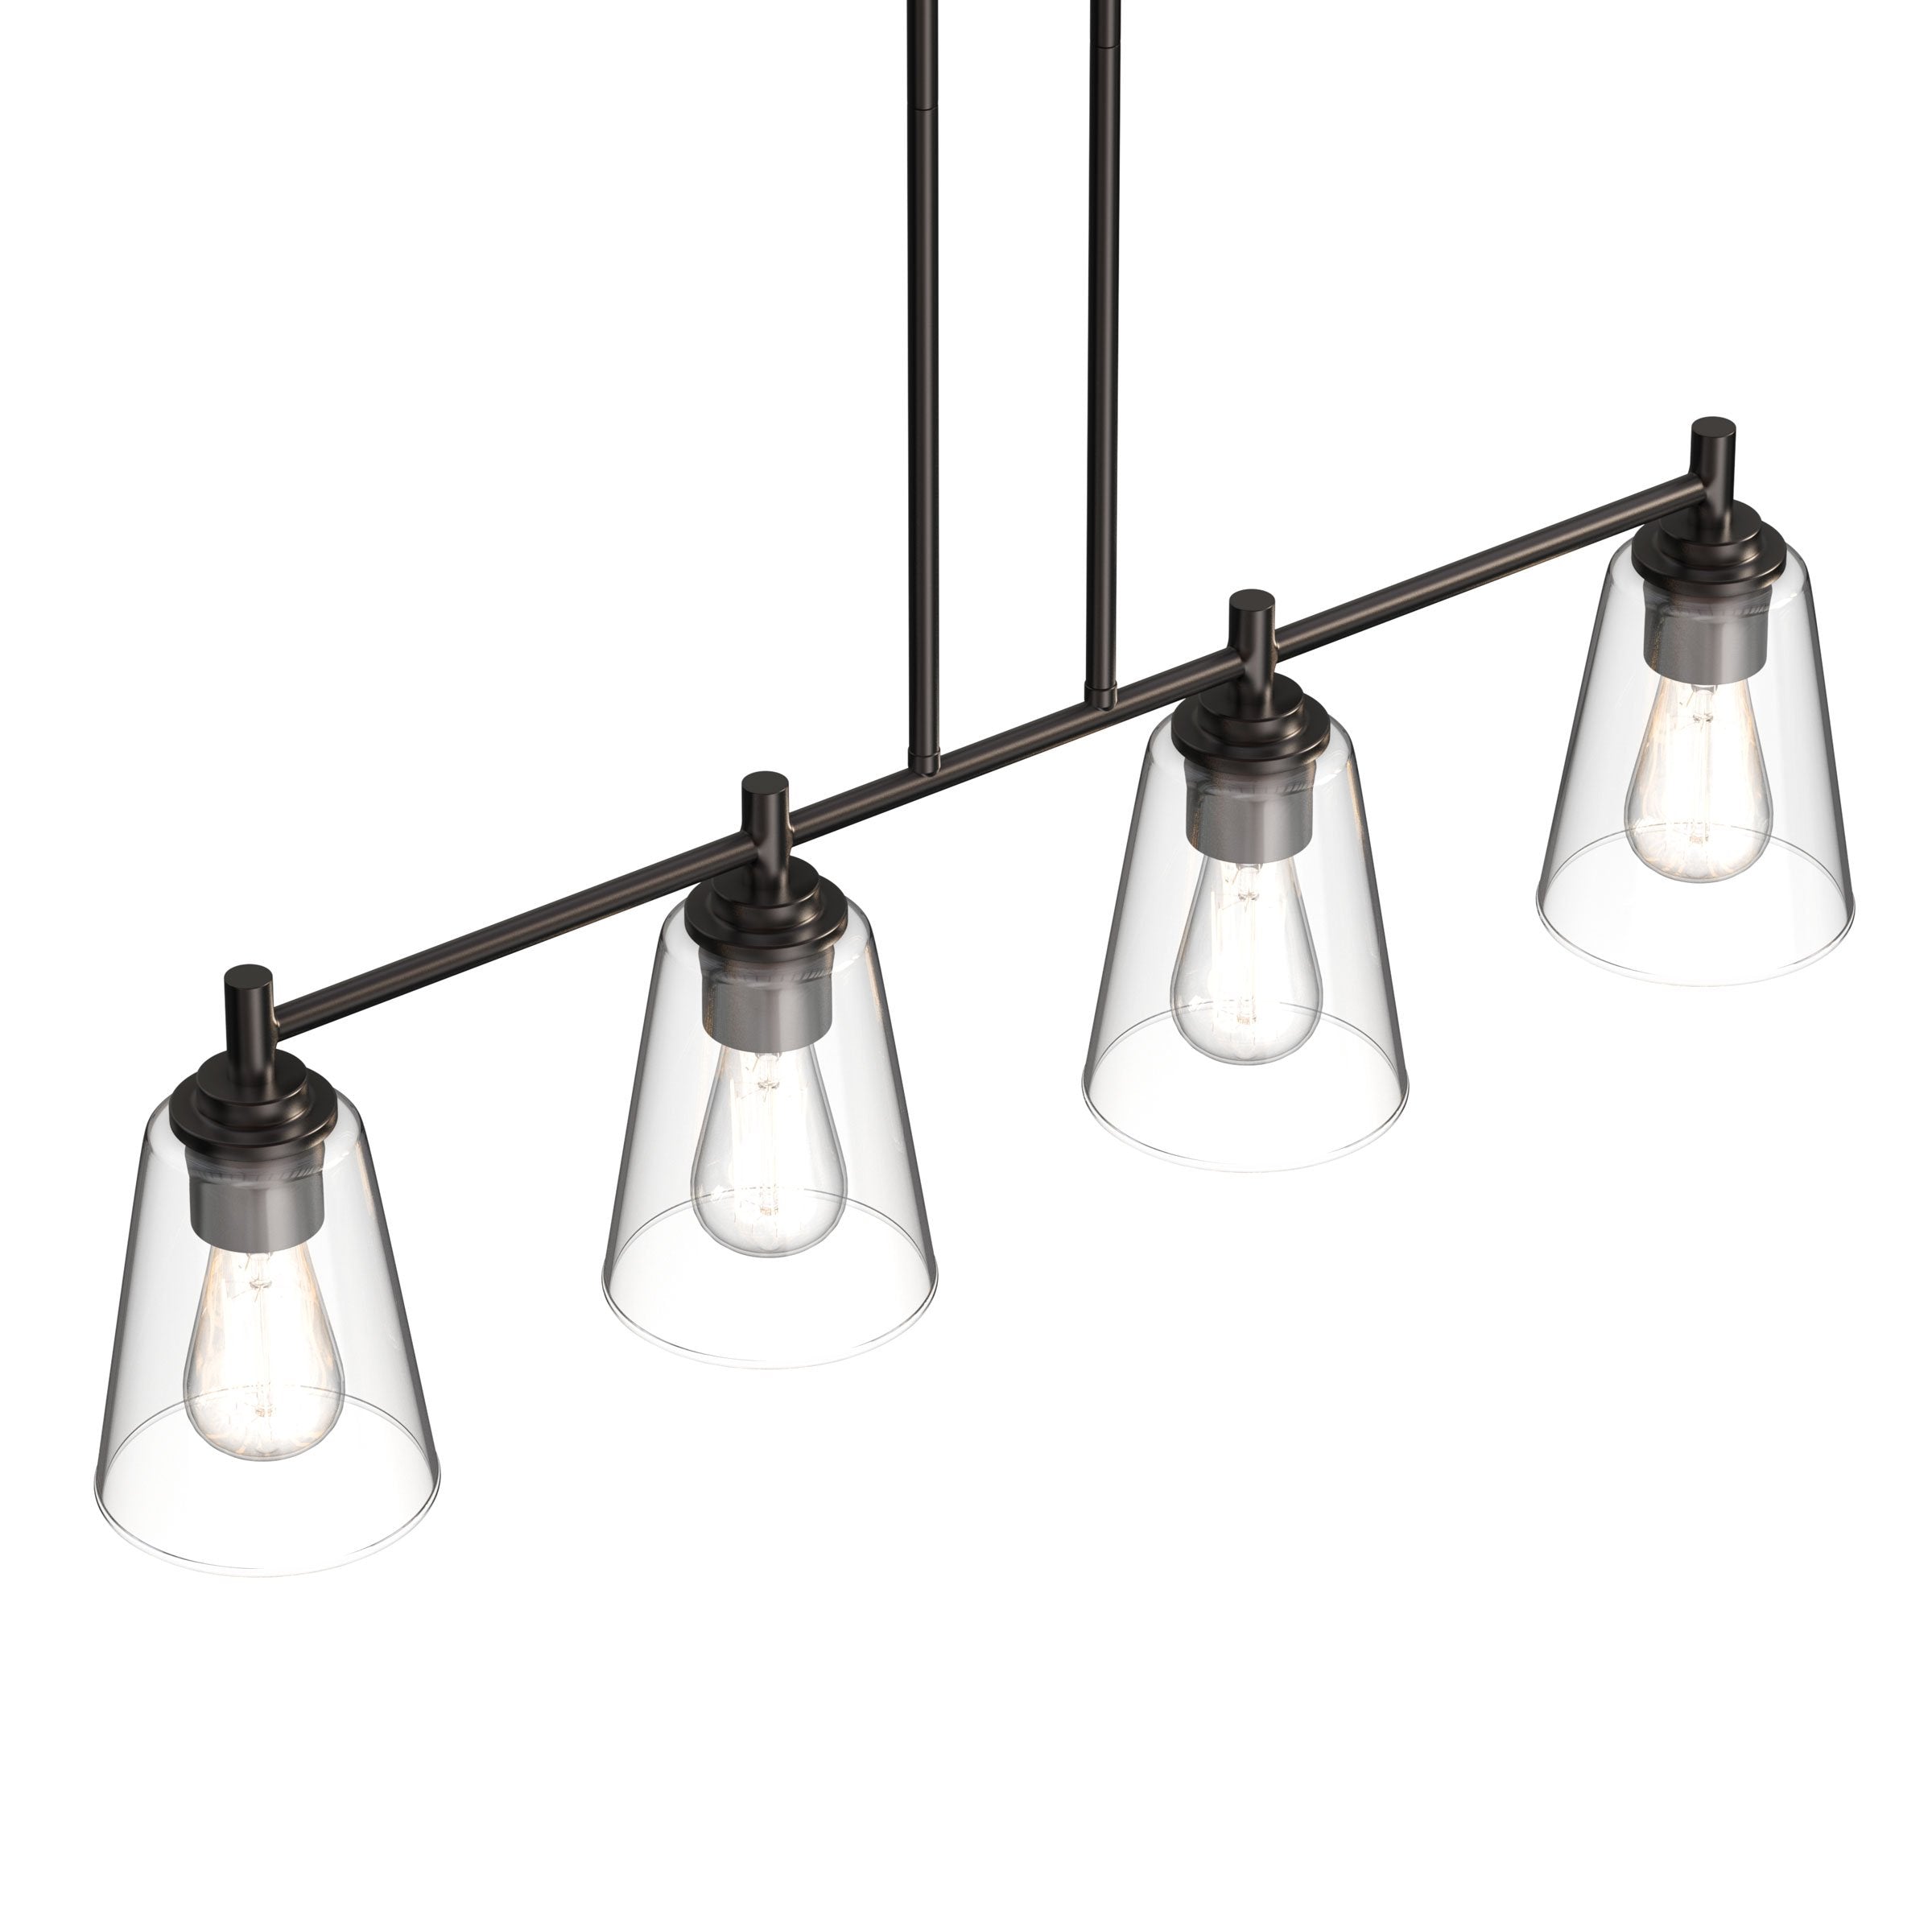 4-Lights Island Linear Pendant Light with Clear Glass Shade, E26 Base, UL Listed for Damp Location